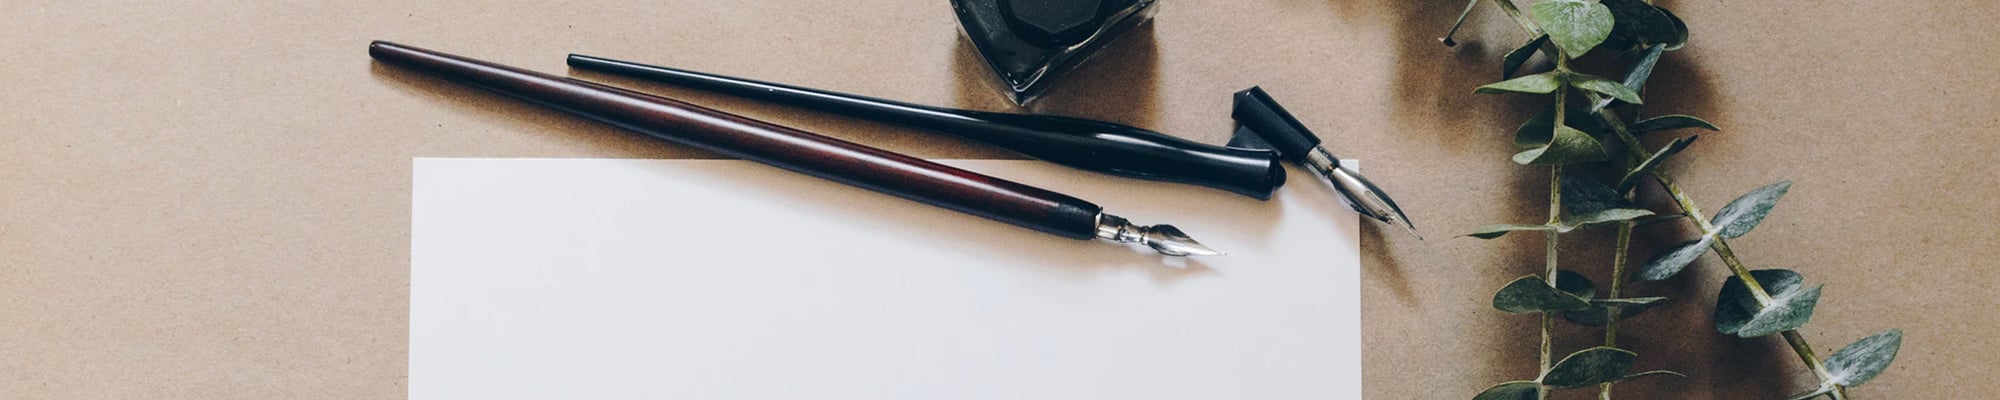 image of a white paper with two fountain pens